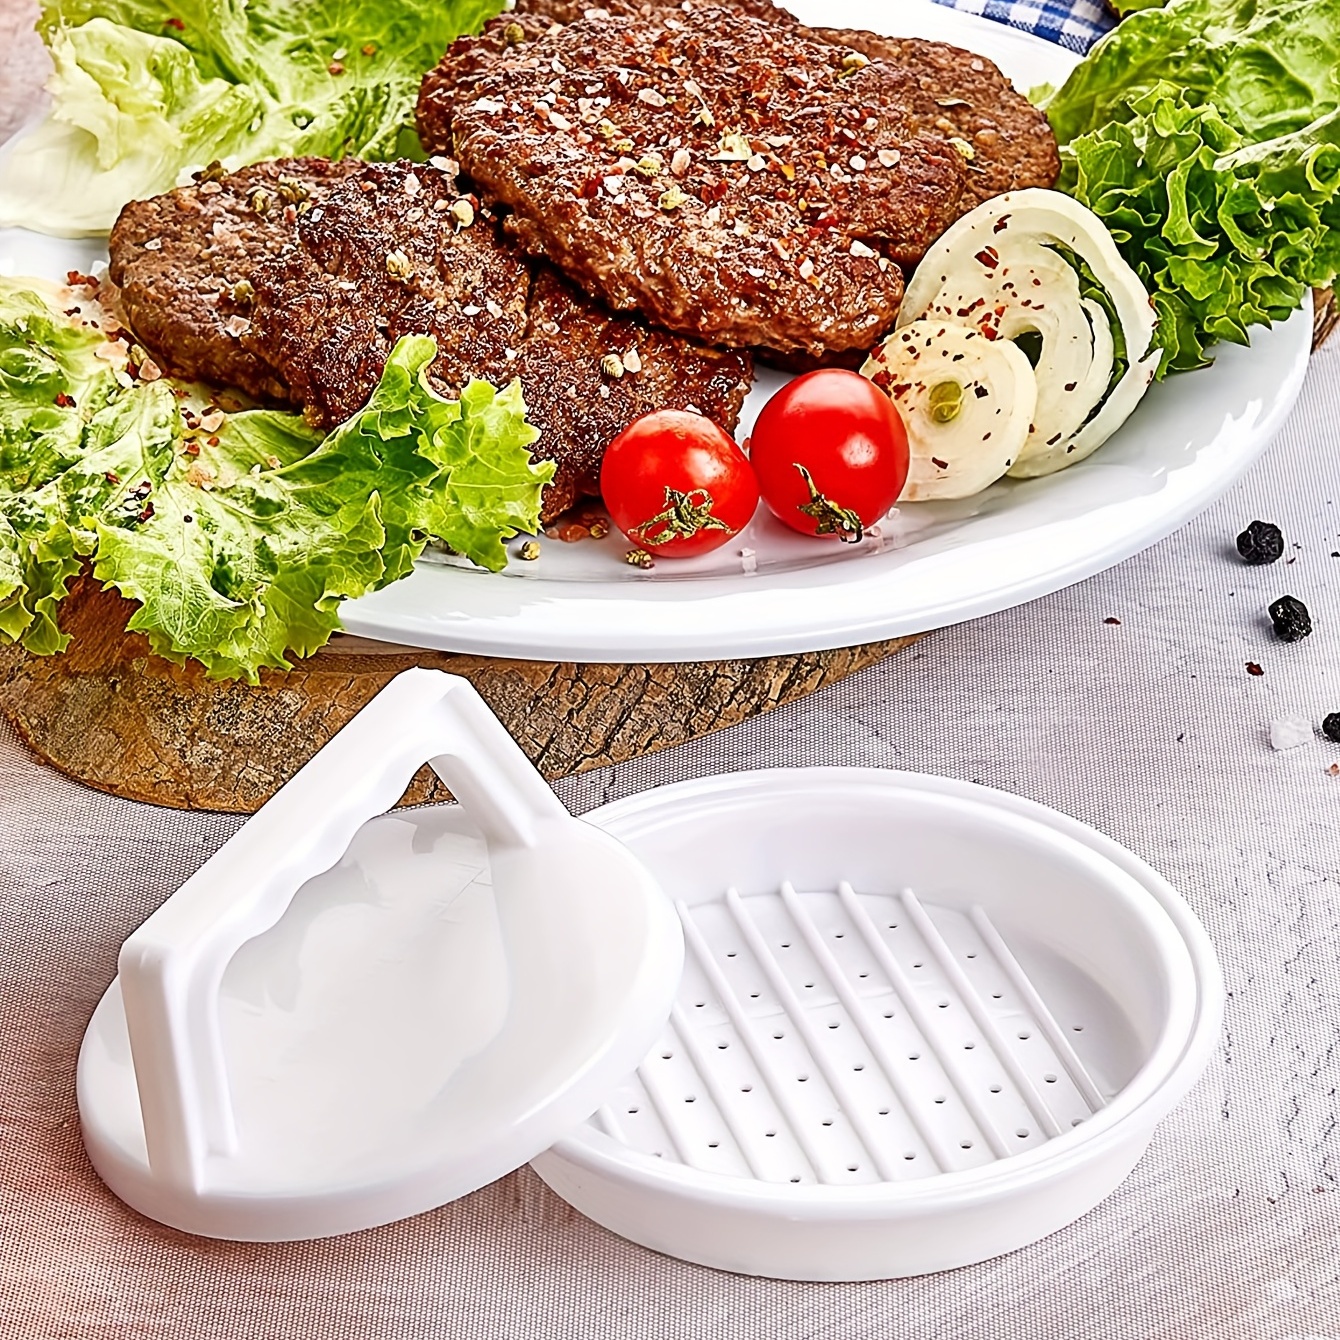 1pc Meat Press Meat Stamping Tool Round Burger Meat Beef BBQ Burger  Stamping Cake Making Dies Kitchen Gadgets And Accessories